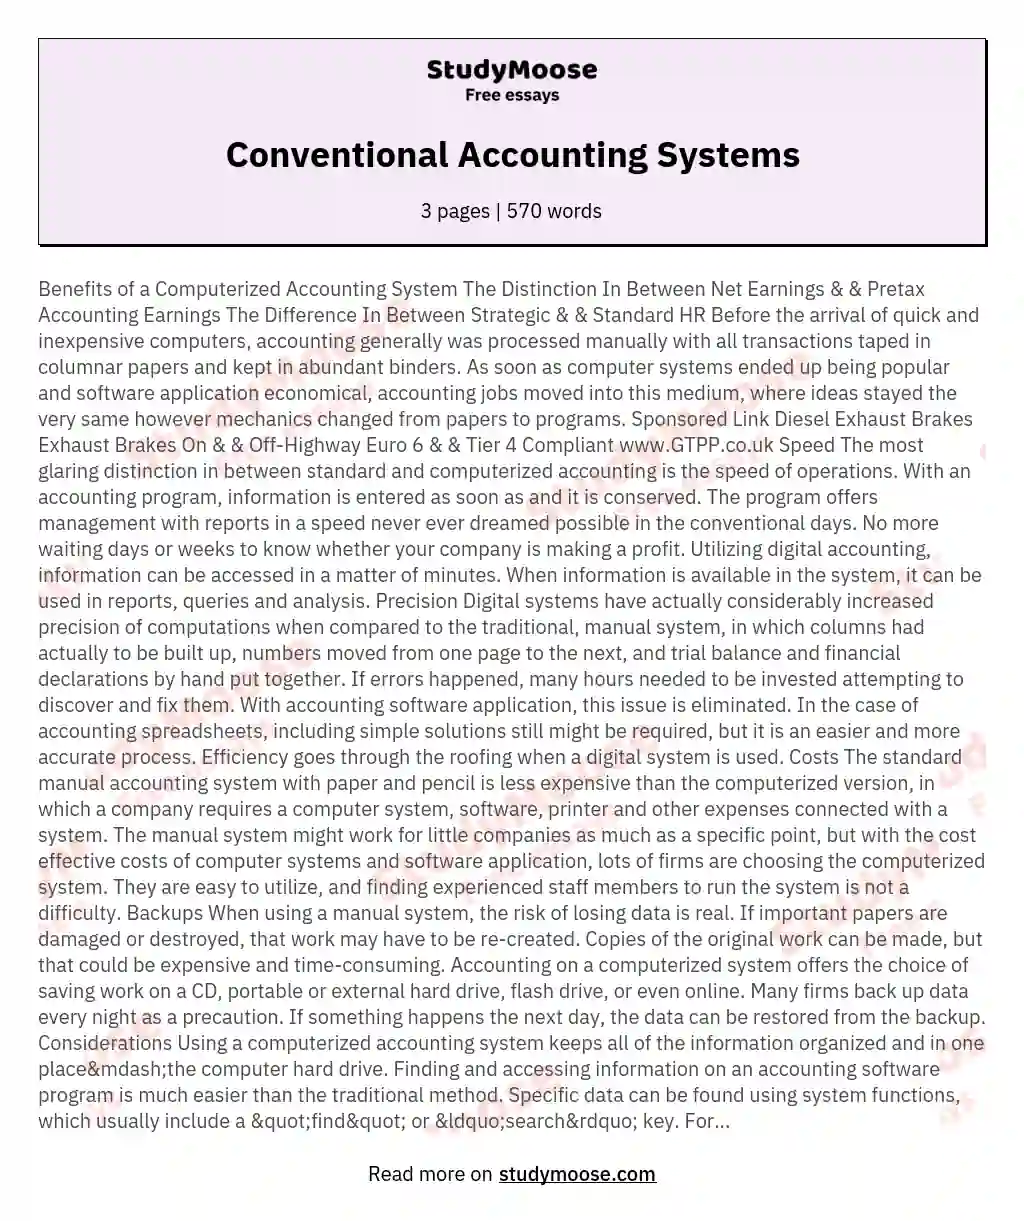 Conventional Accounting Systems essay